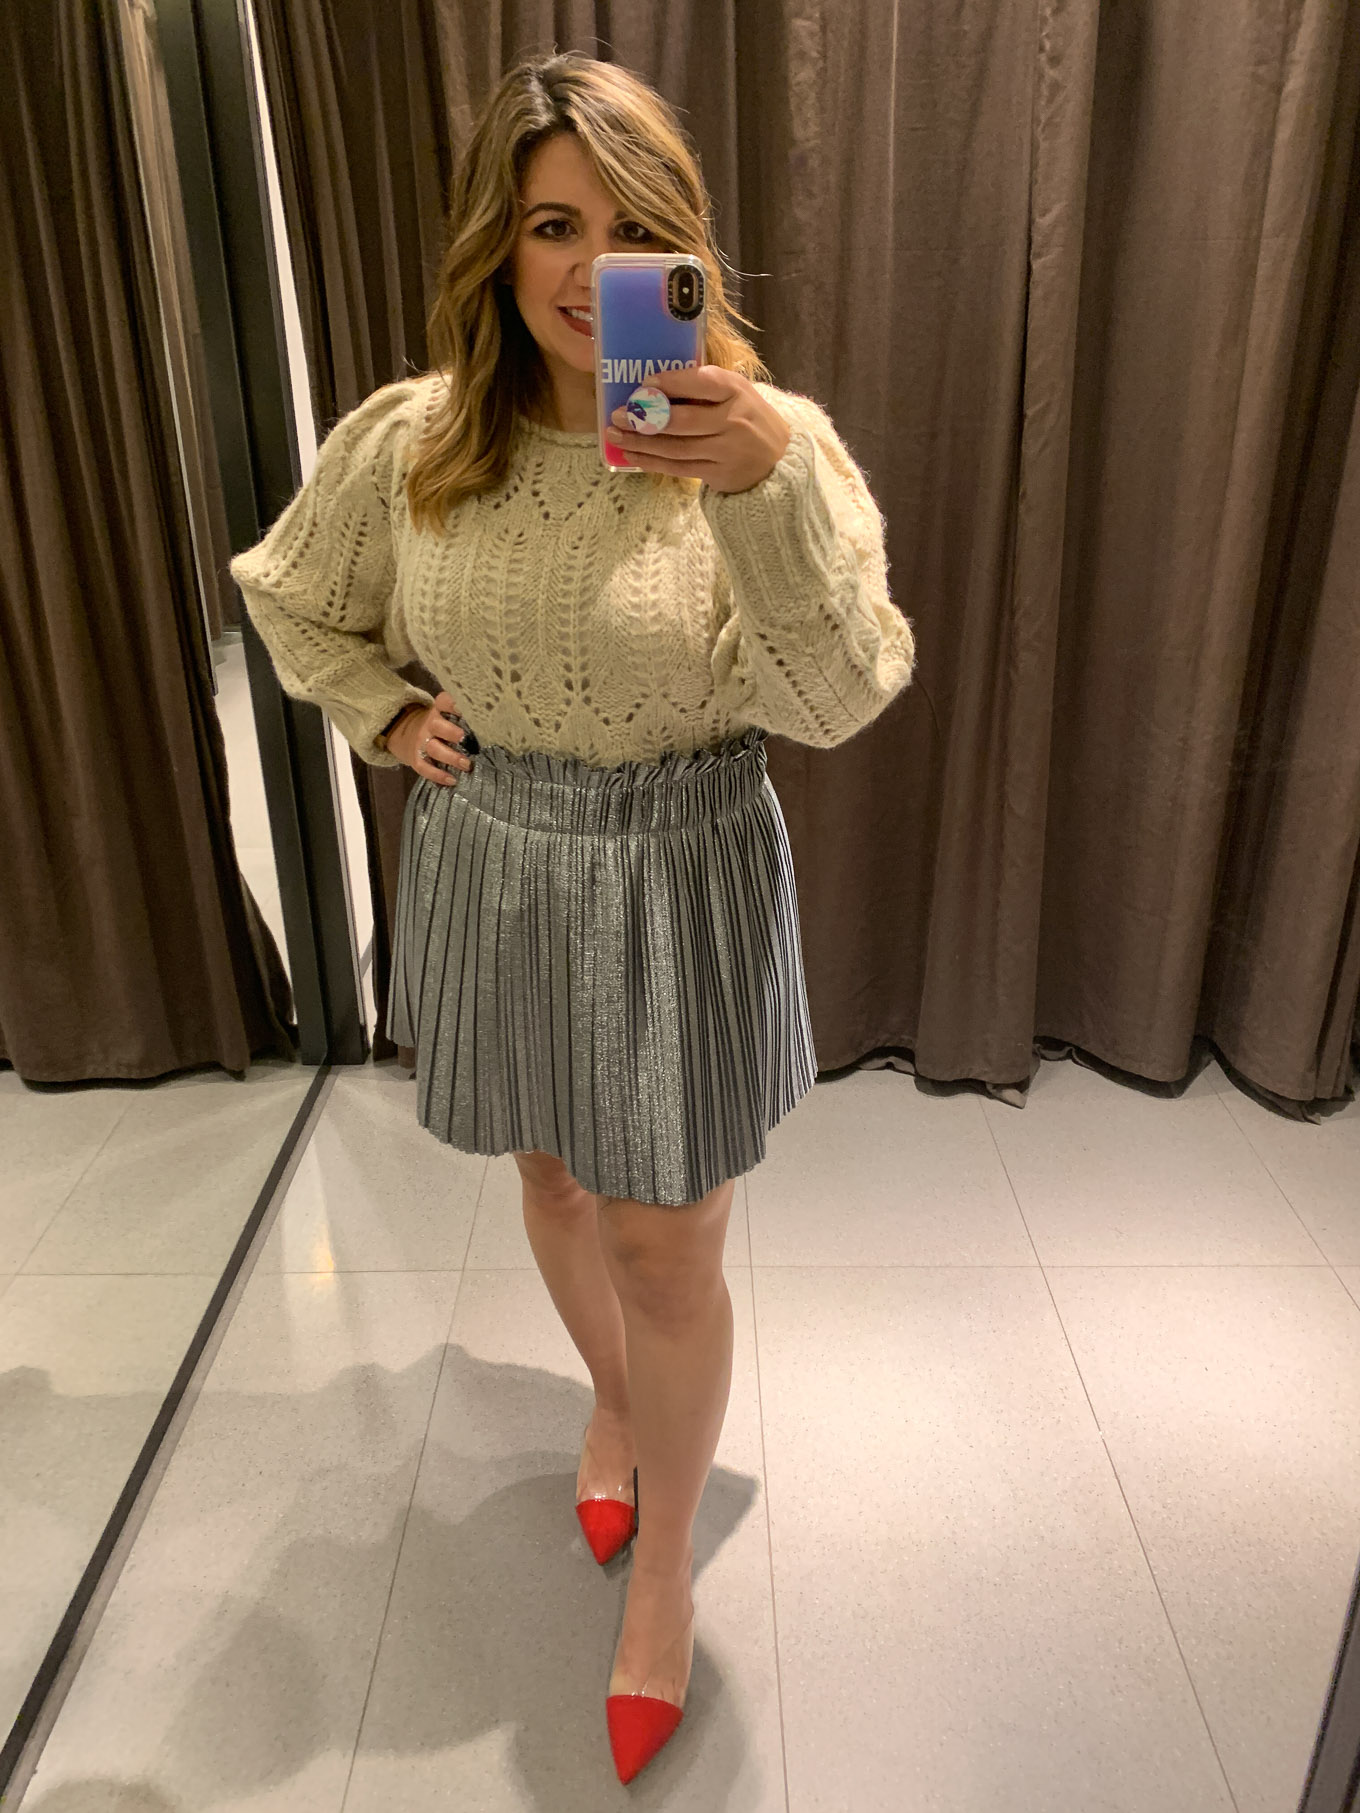 Fall Fashion at Woodfield Mall by popular Chicago fashion blog, Glass of Glam: image of a woman standing in a dressing room at Zara and trying on a cropped sweater.